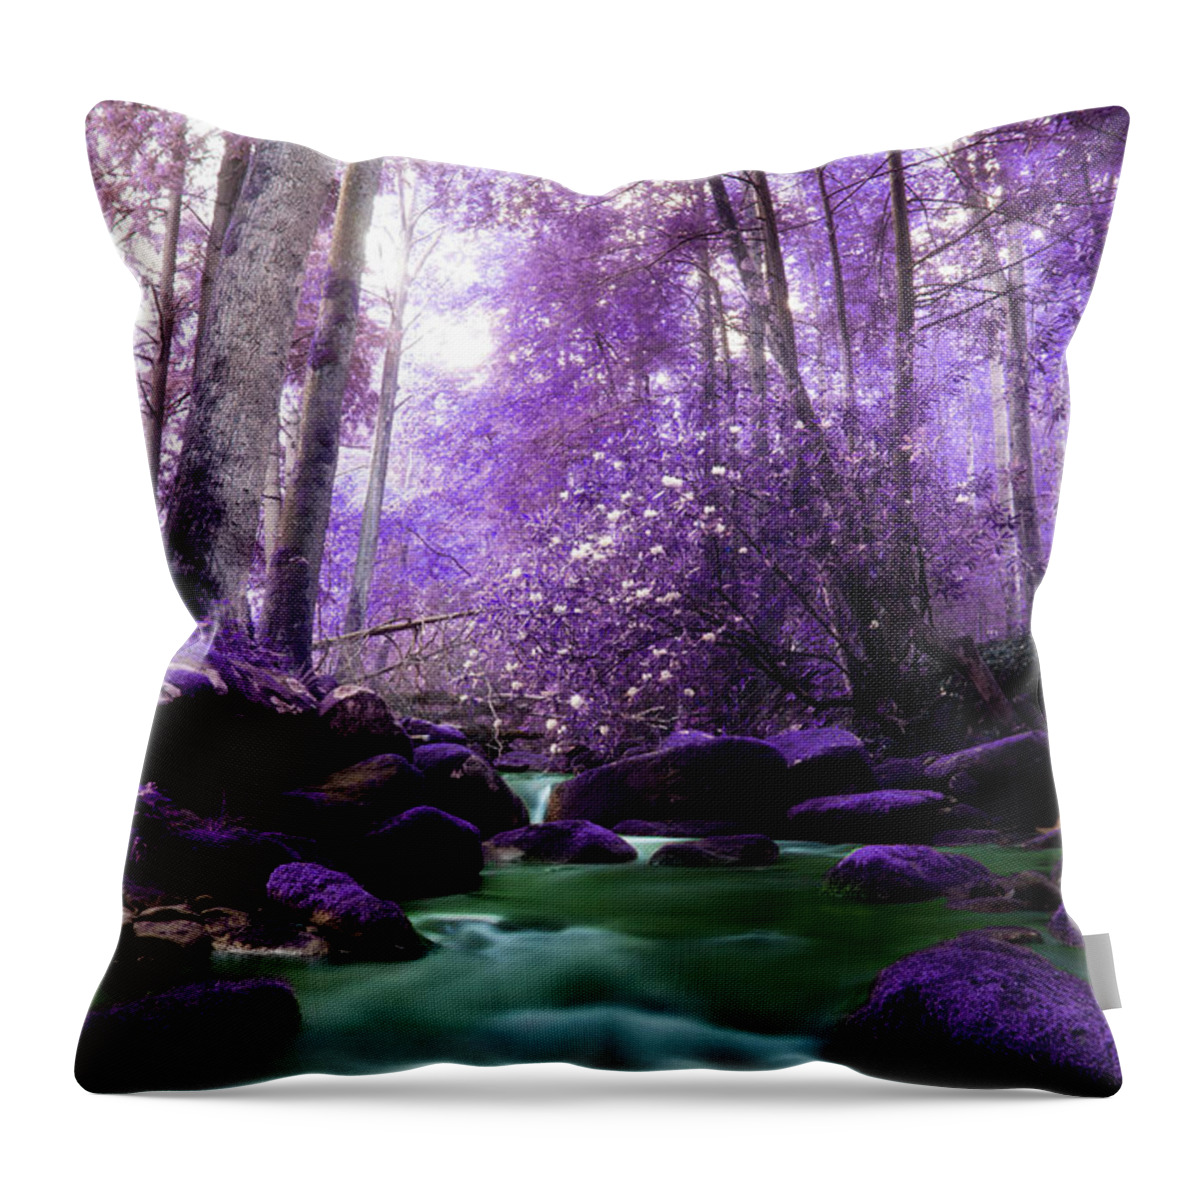 River Throw Pillow featuring the photograph Flowing Dreams by Mike Eingle